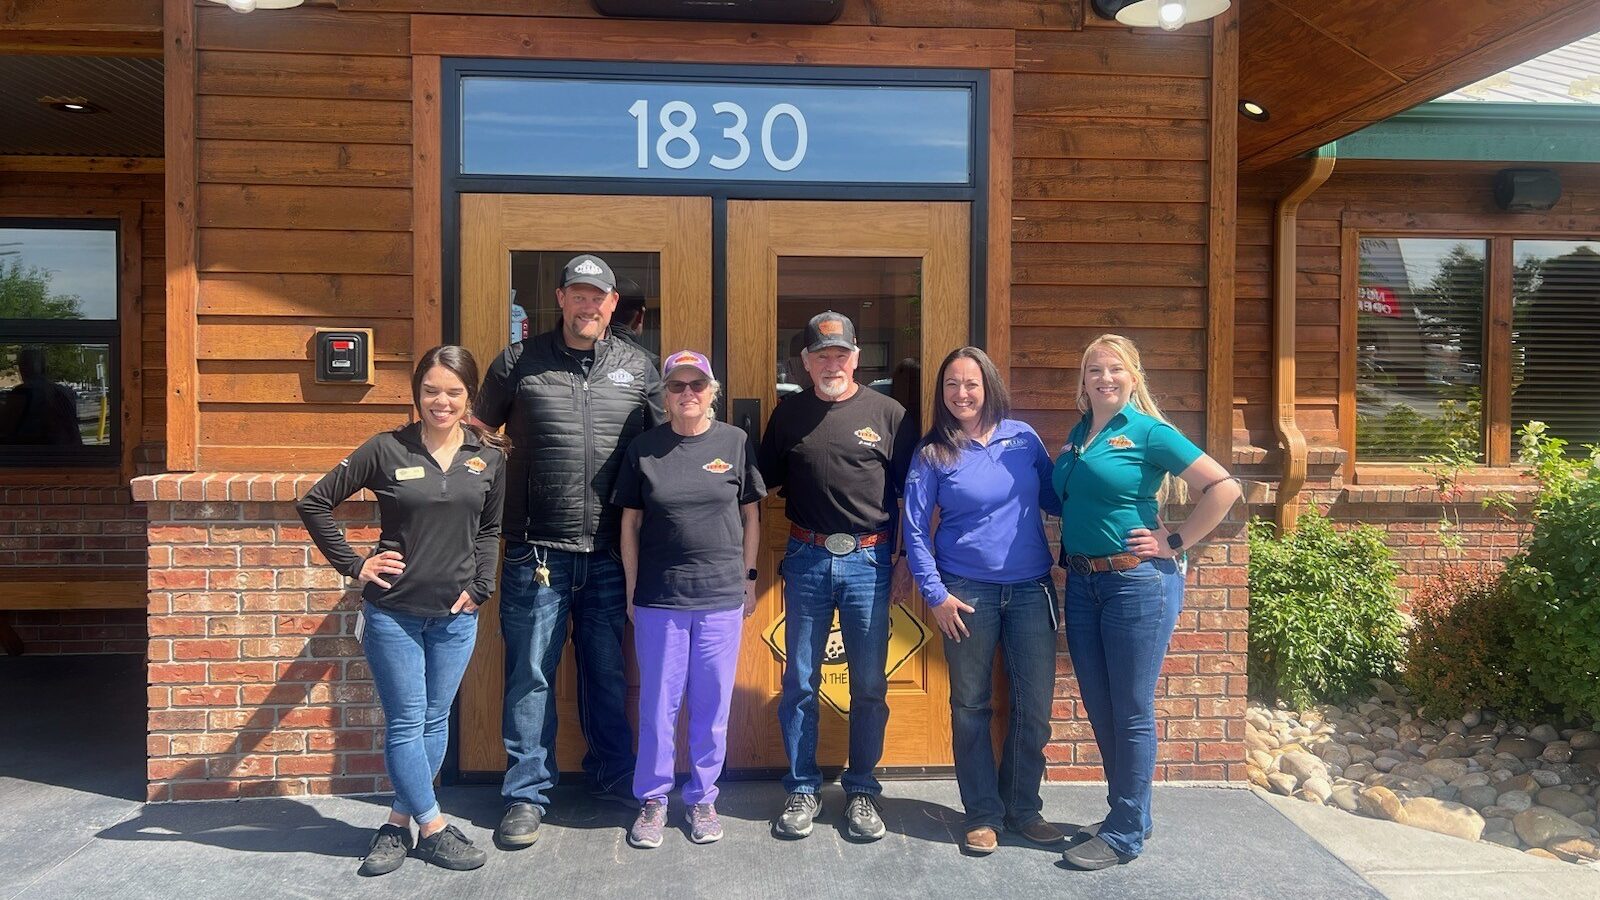 A Virginia couple arrived in Utah this week on a nationwide tour of Texas Roadhouse restaurant loca...